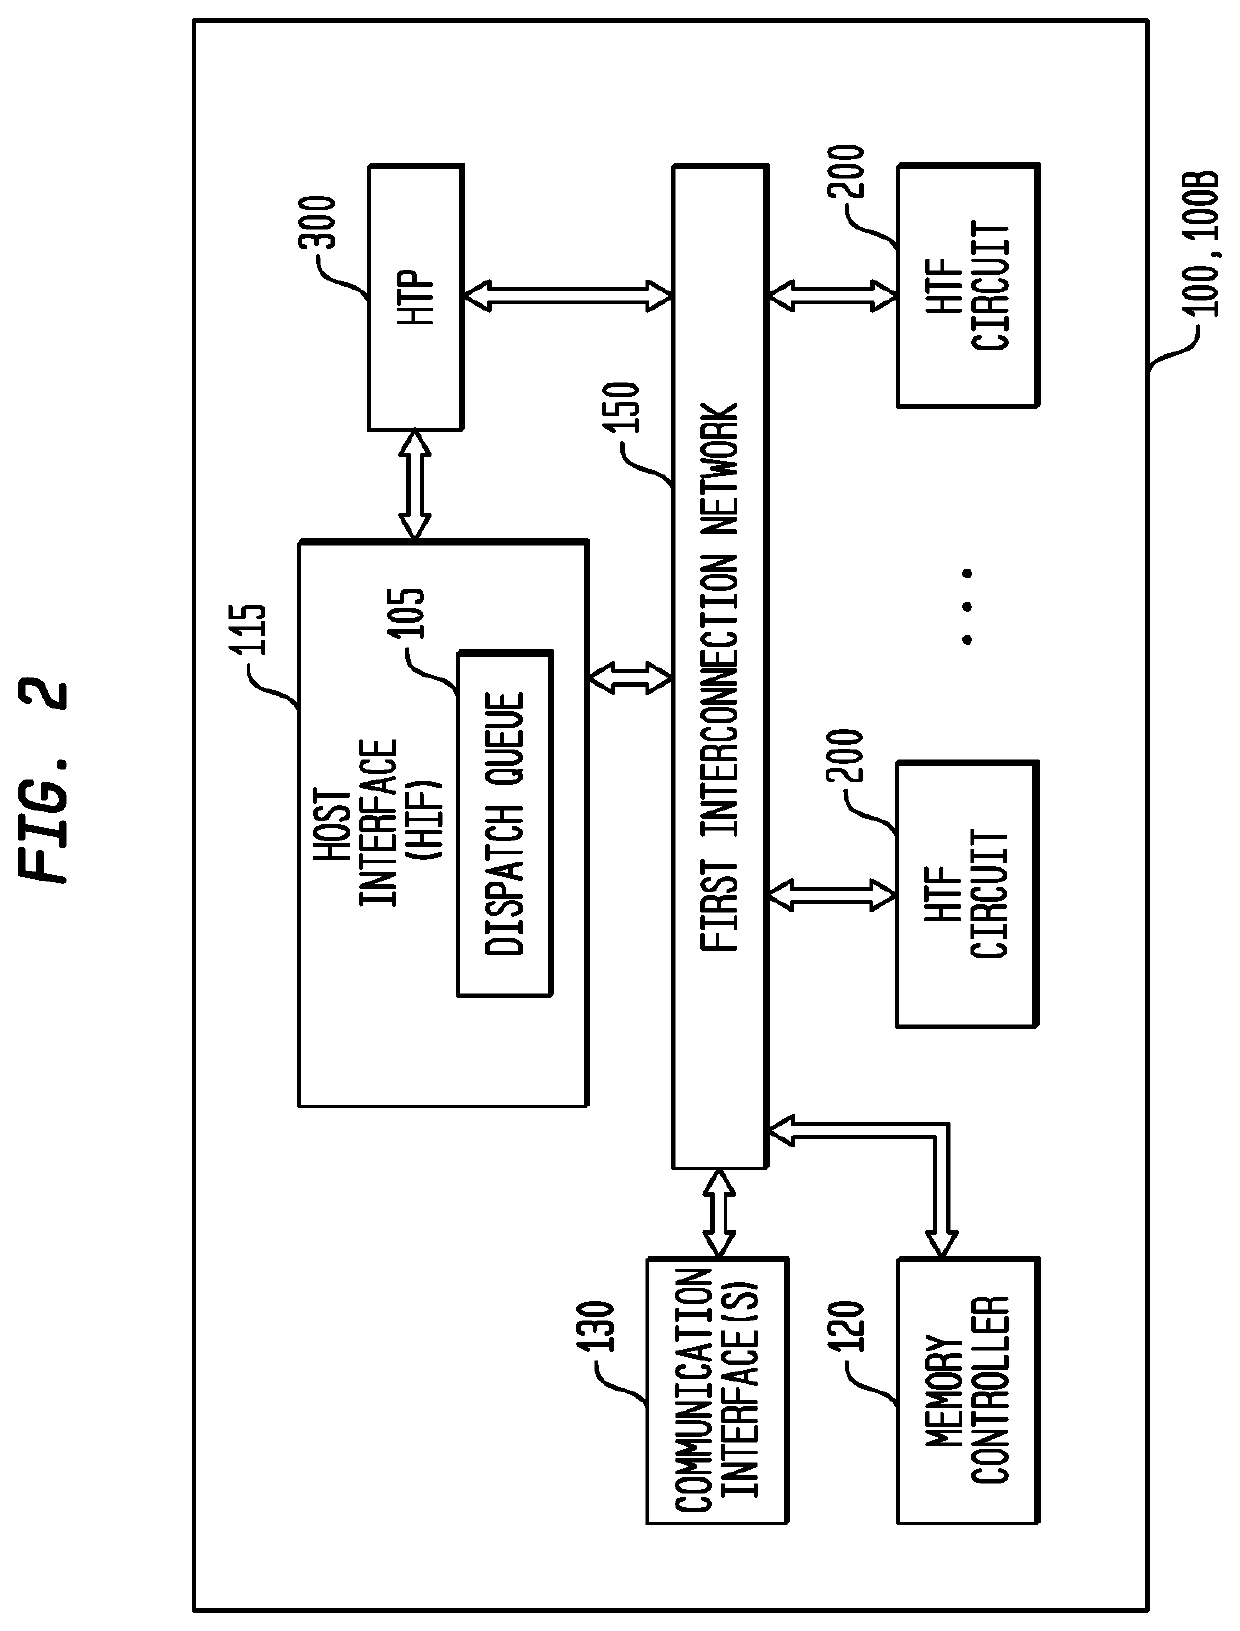 Event Messaging in a System Having a Self-Scheduling Processor and a Hybrid Threading Fabric